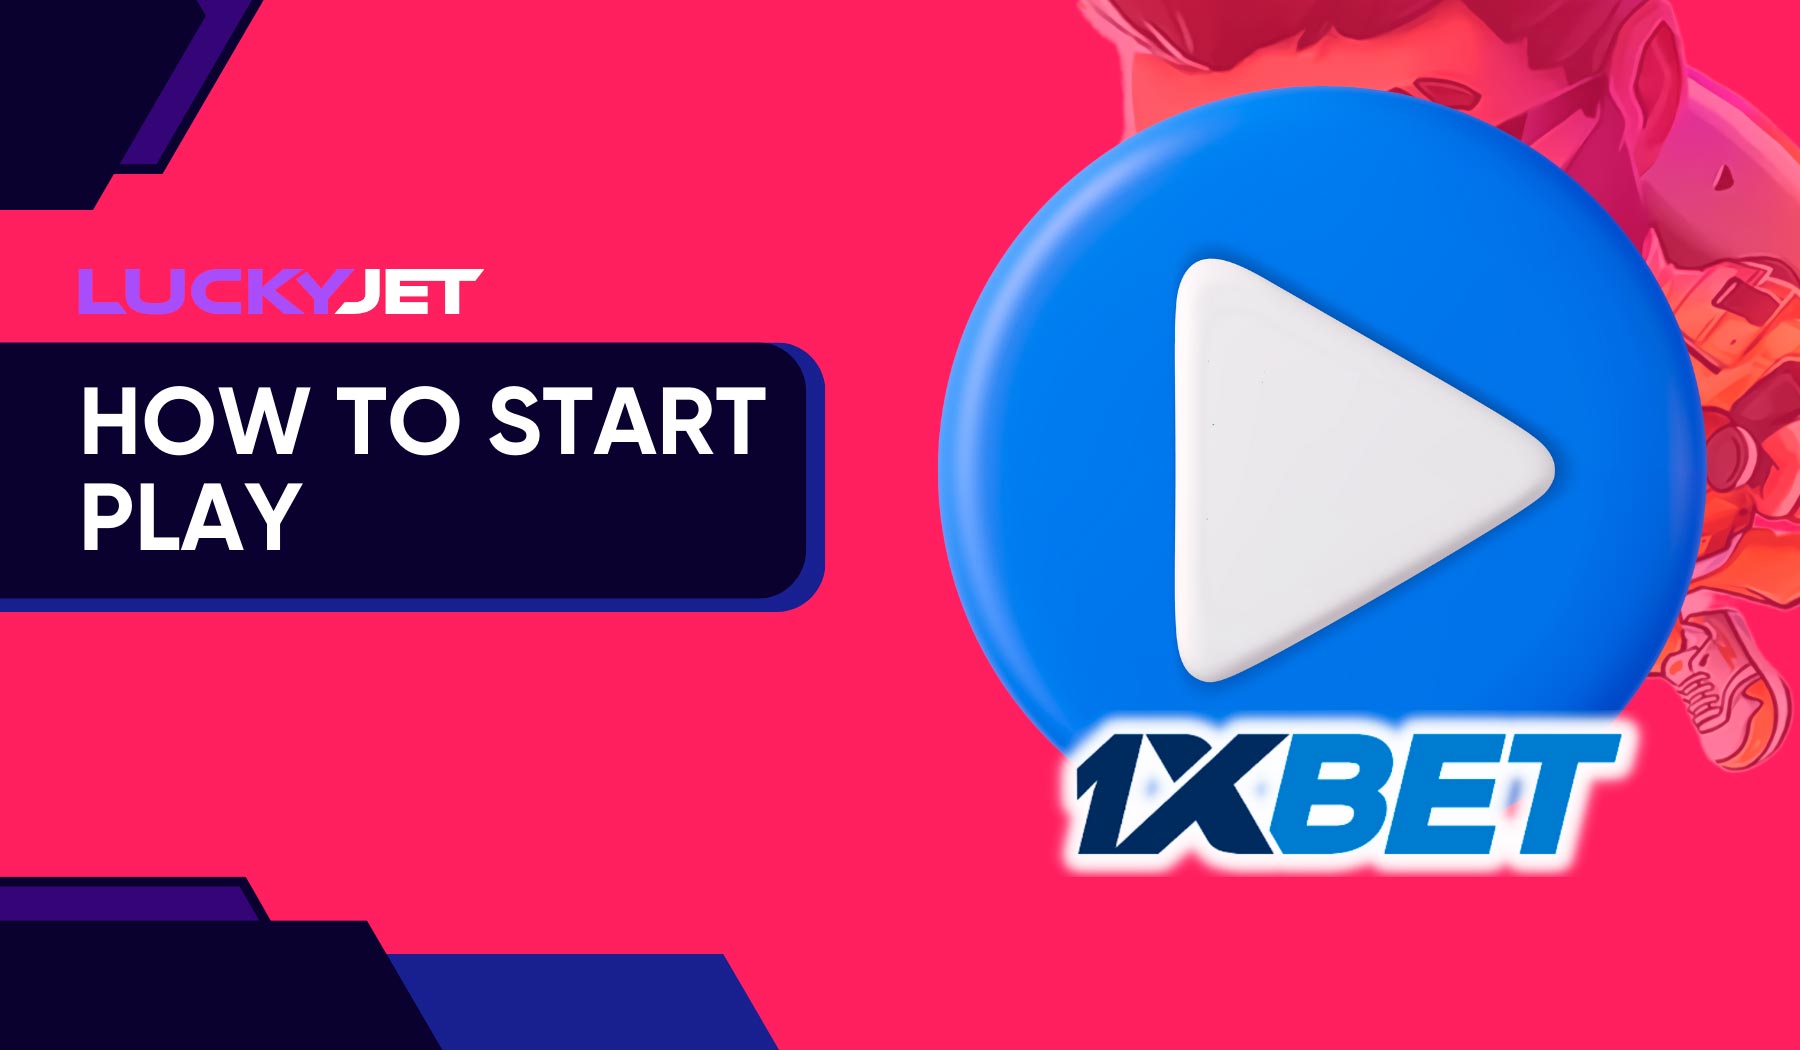 Starting the Lucky Jet game through the 1xbet platform